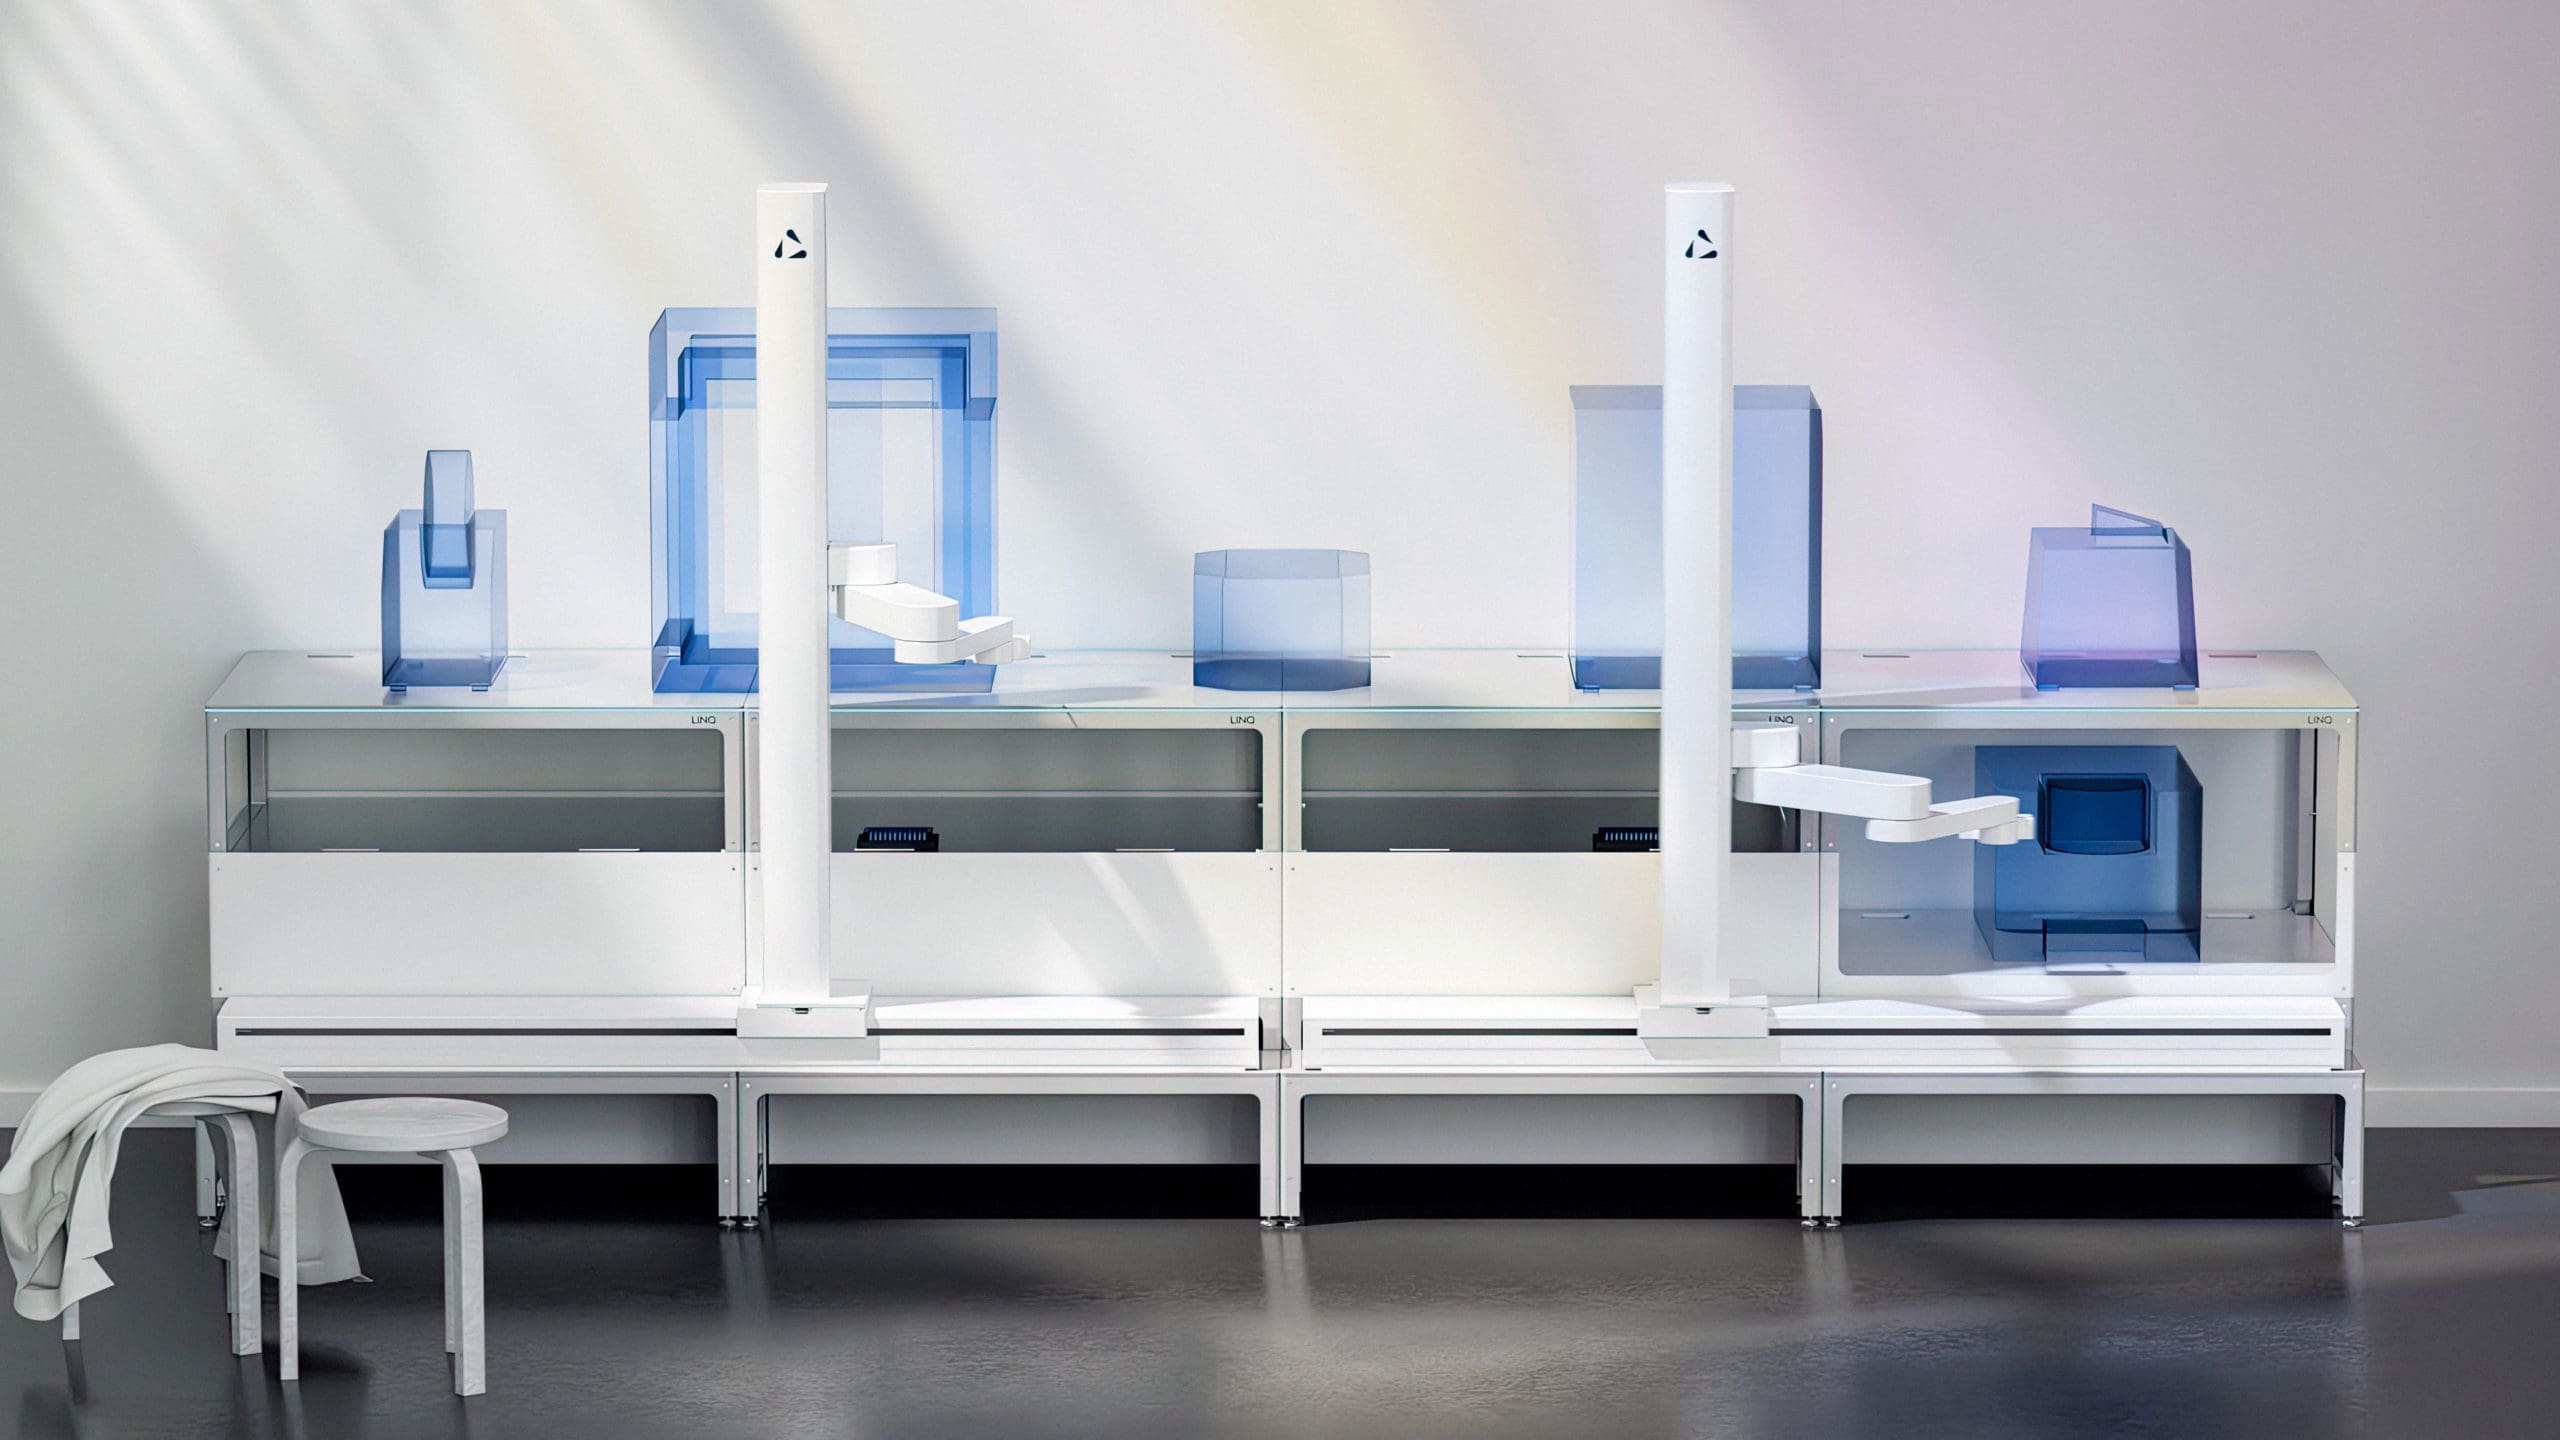 A render of 4 Automata LINQ benches and 2 robot arms in a laboratory.